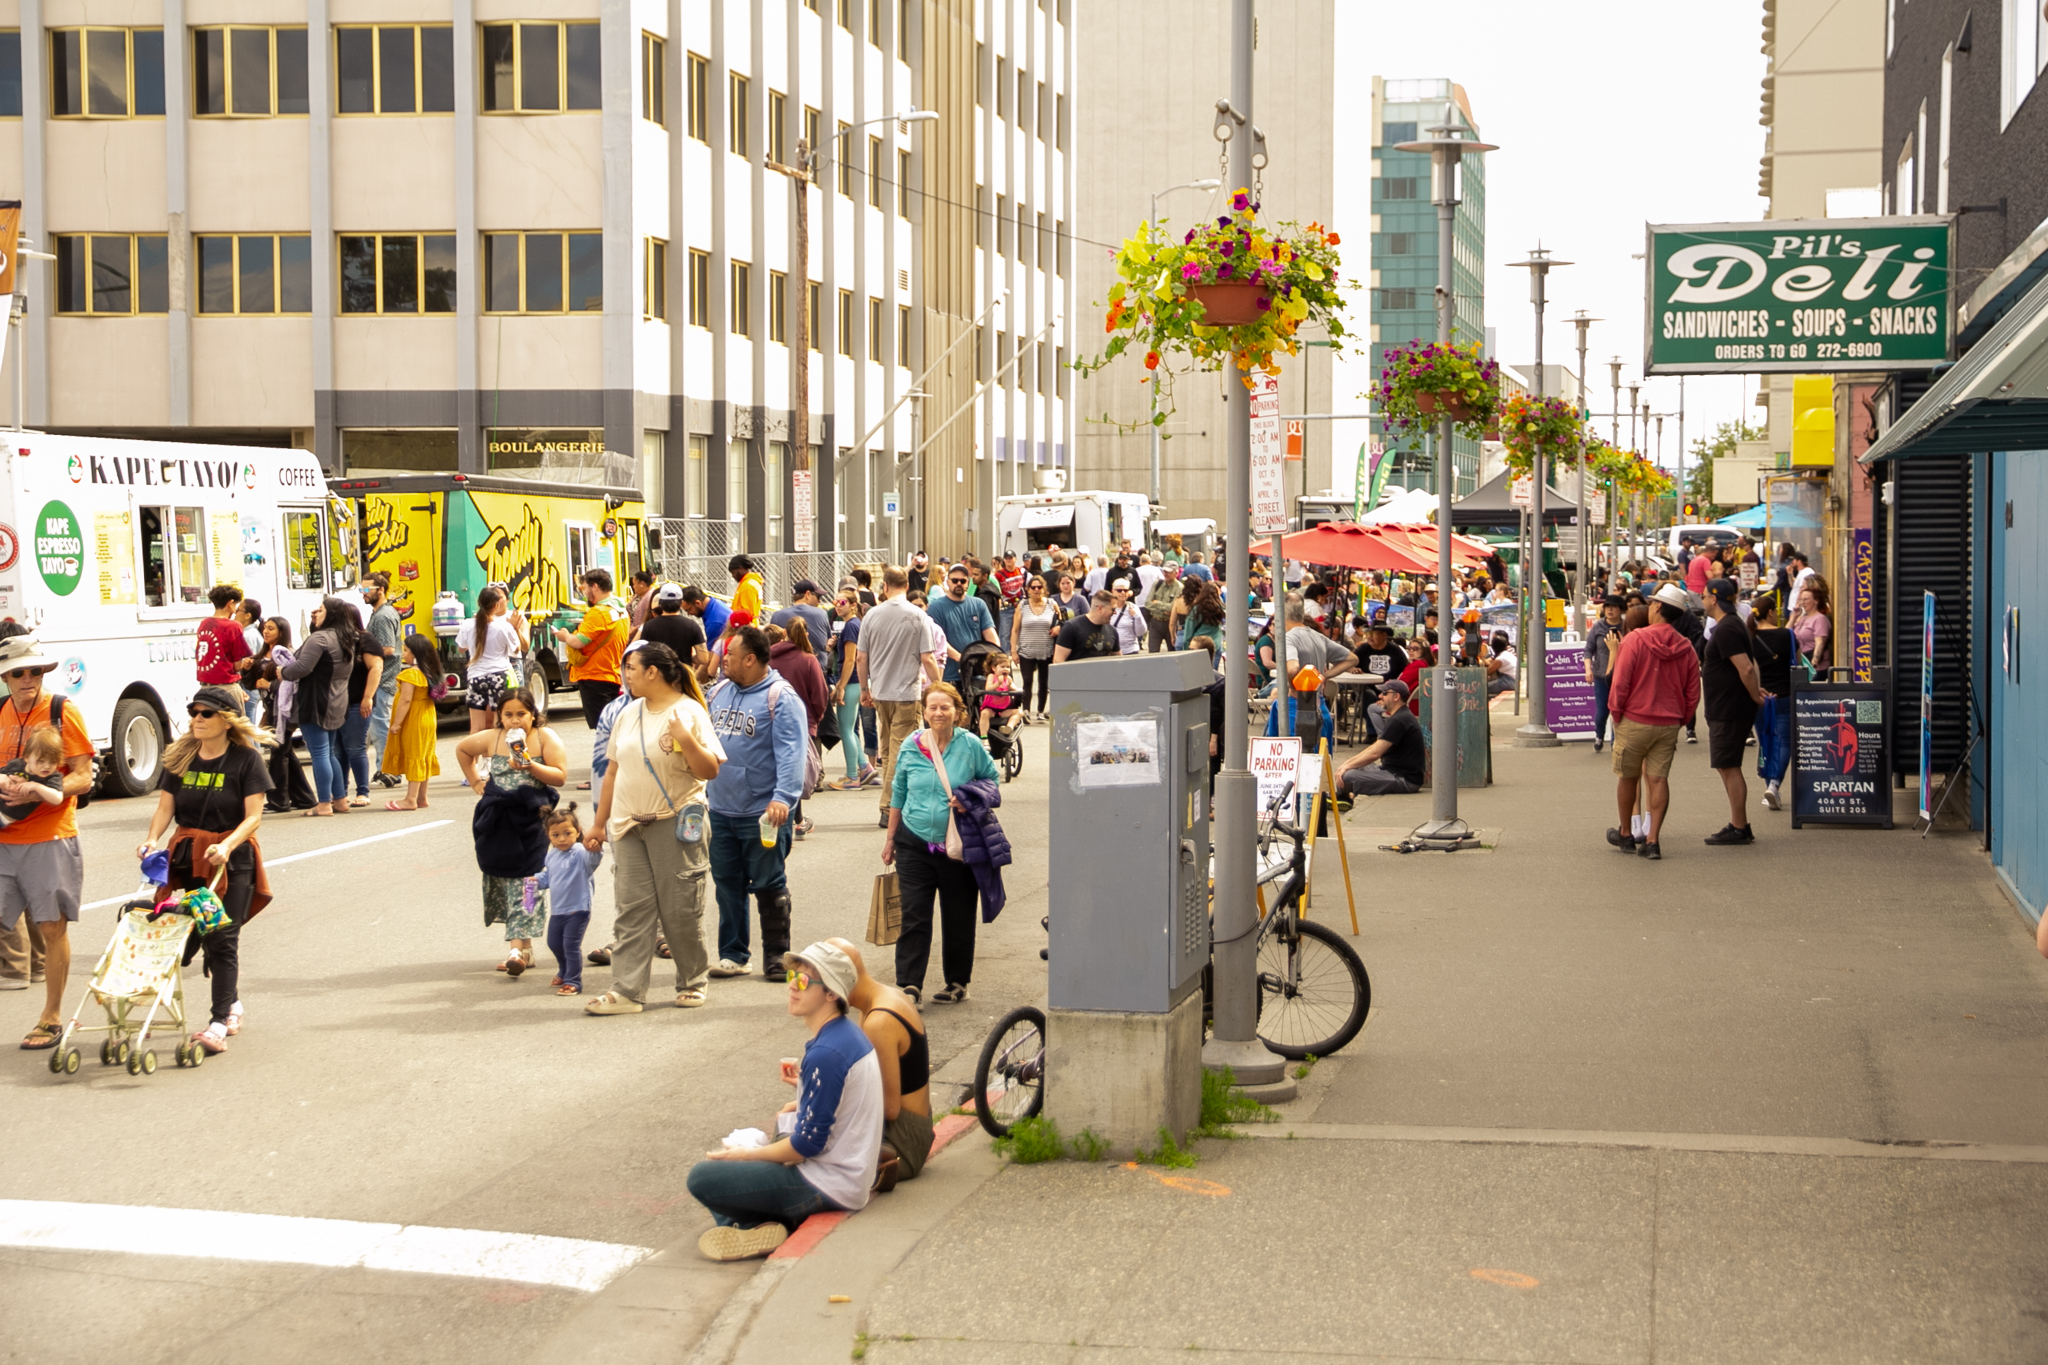 Crowds of people walk past food trucks and vendors along a city street on a summer afternoon.